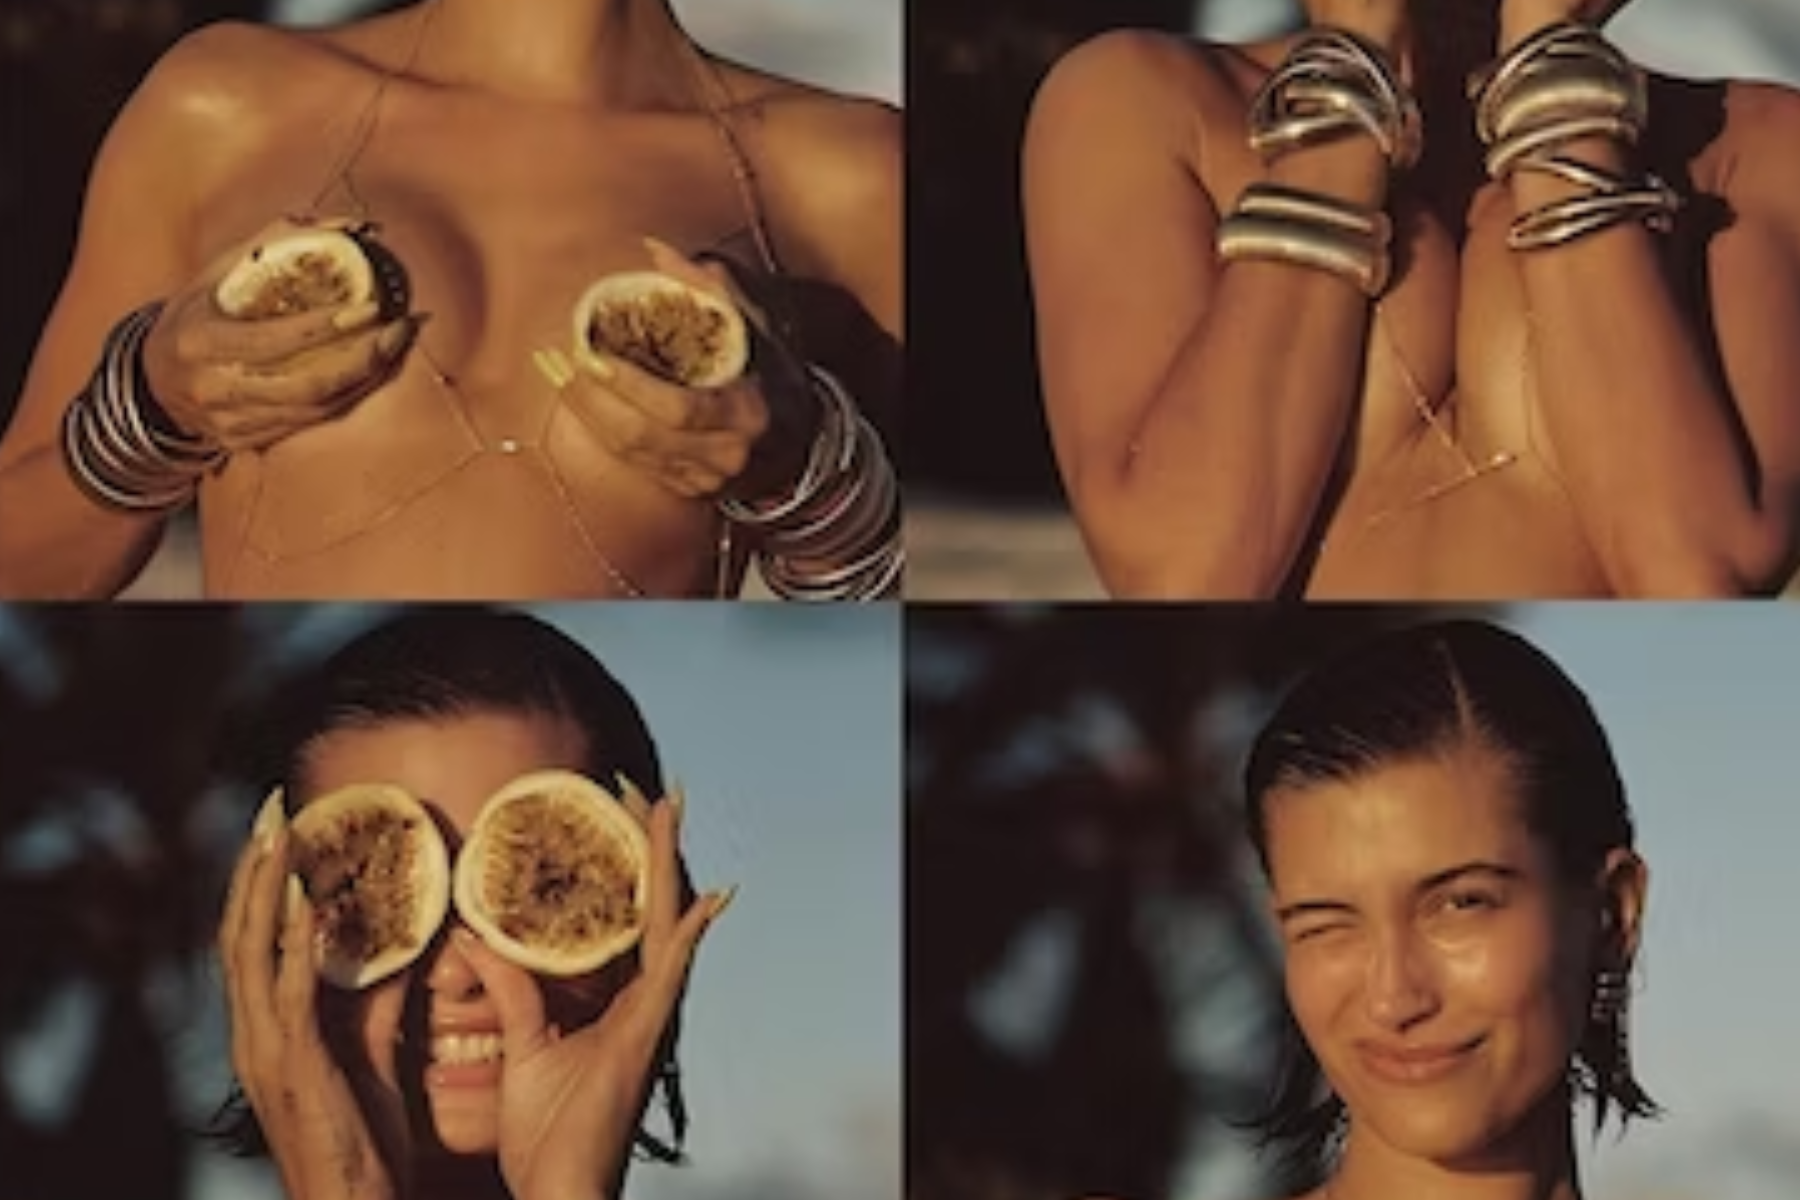 Hailey Bieber poses with a fruit in four photos while wearing a diamond bra